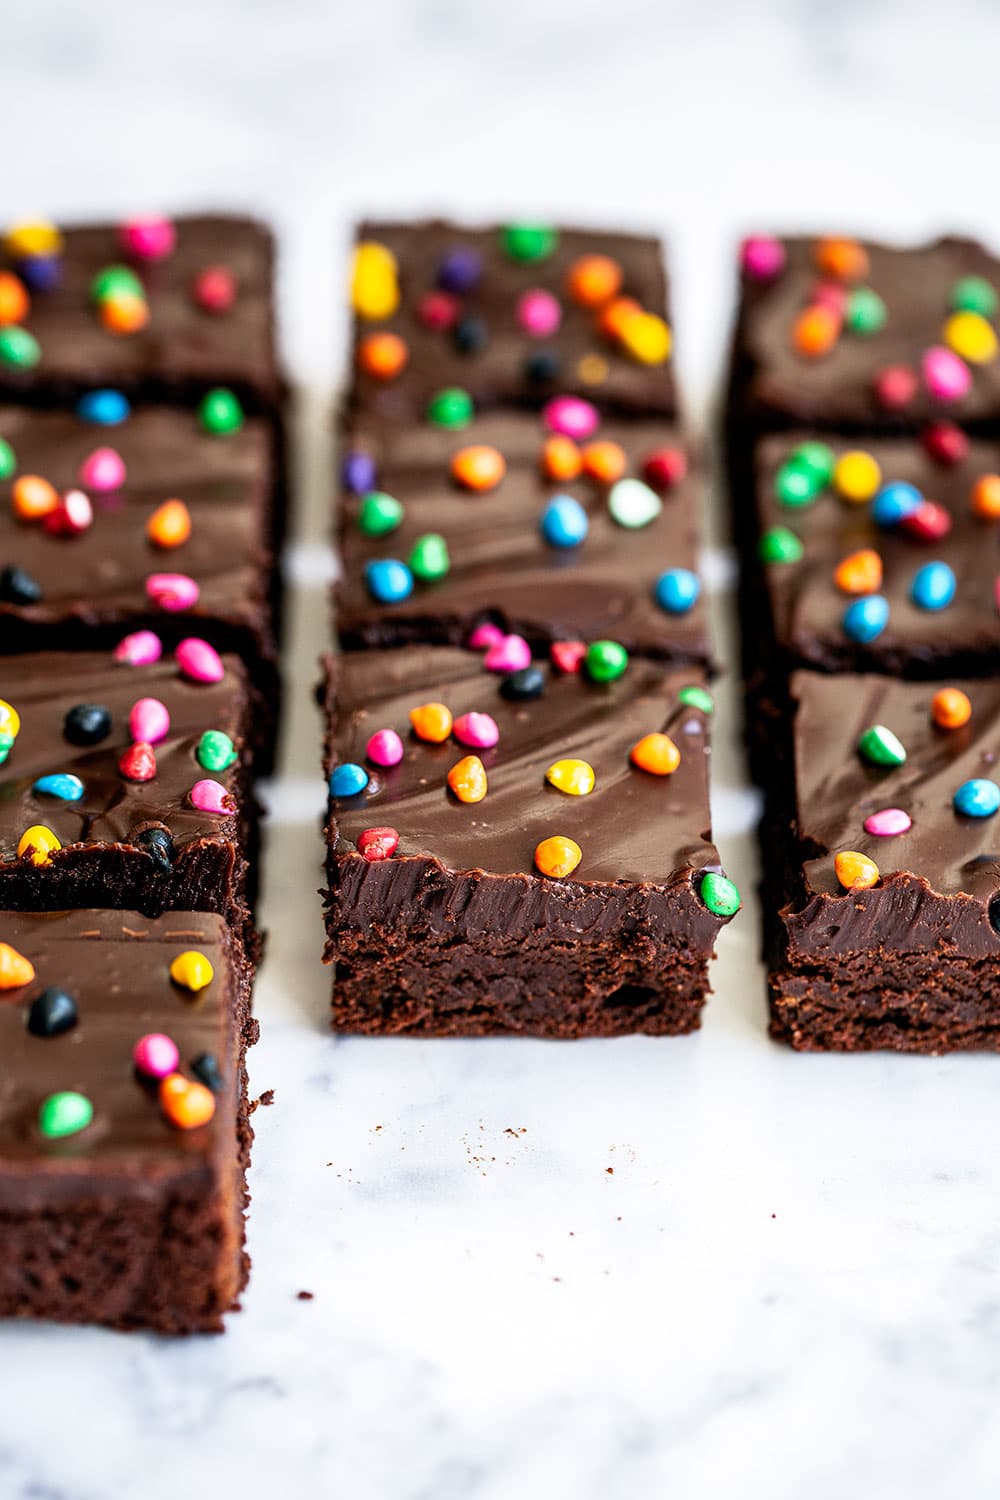 Cosmic brownie squares lined up